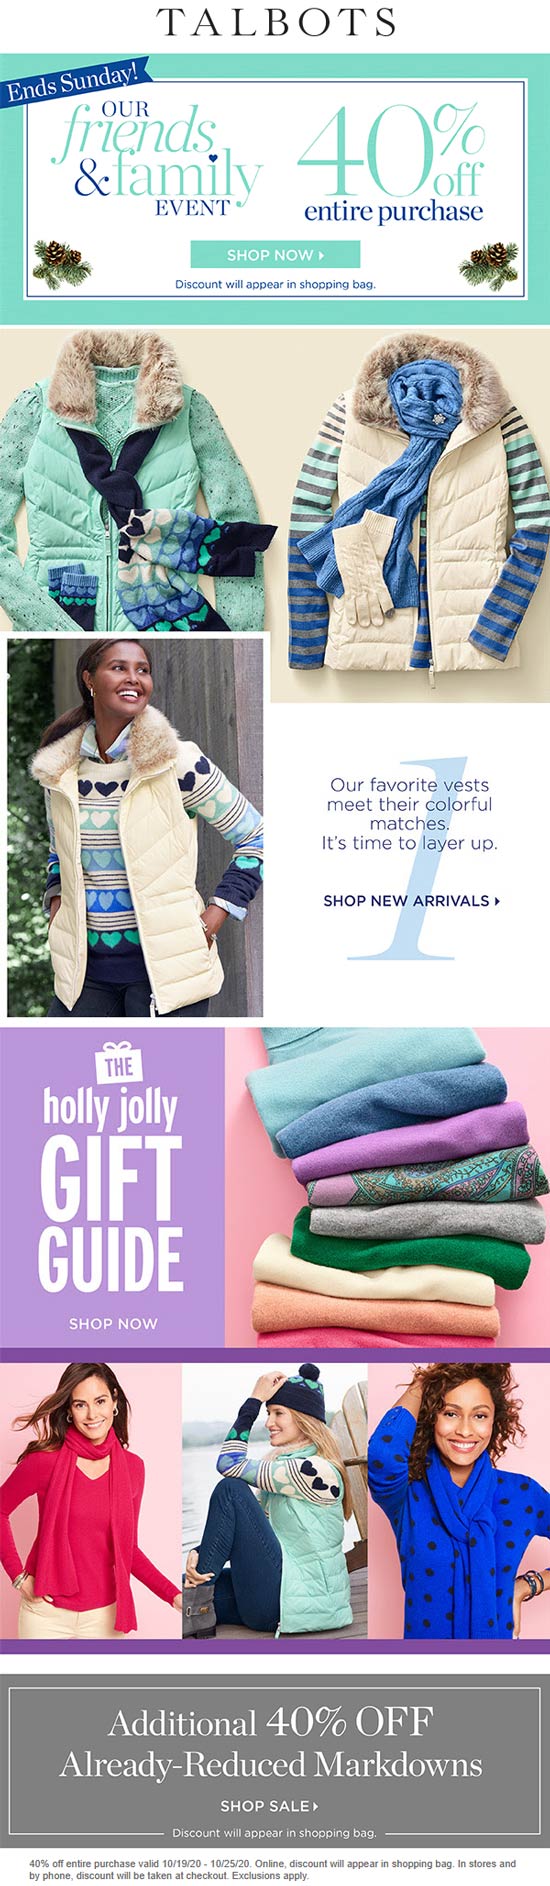 Talbots stores Coupon  40% off everything at Talbots, ditto online #talbots 